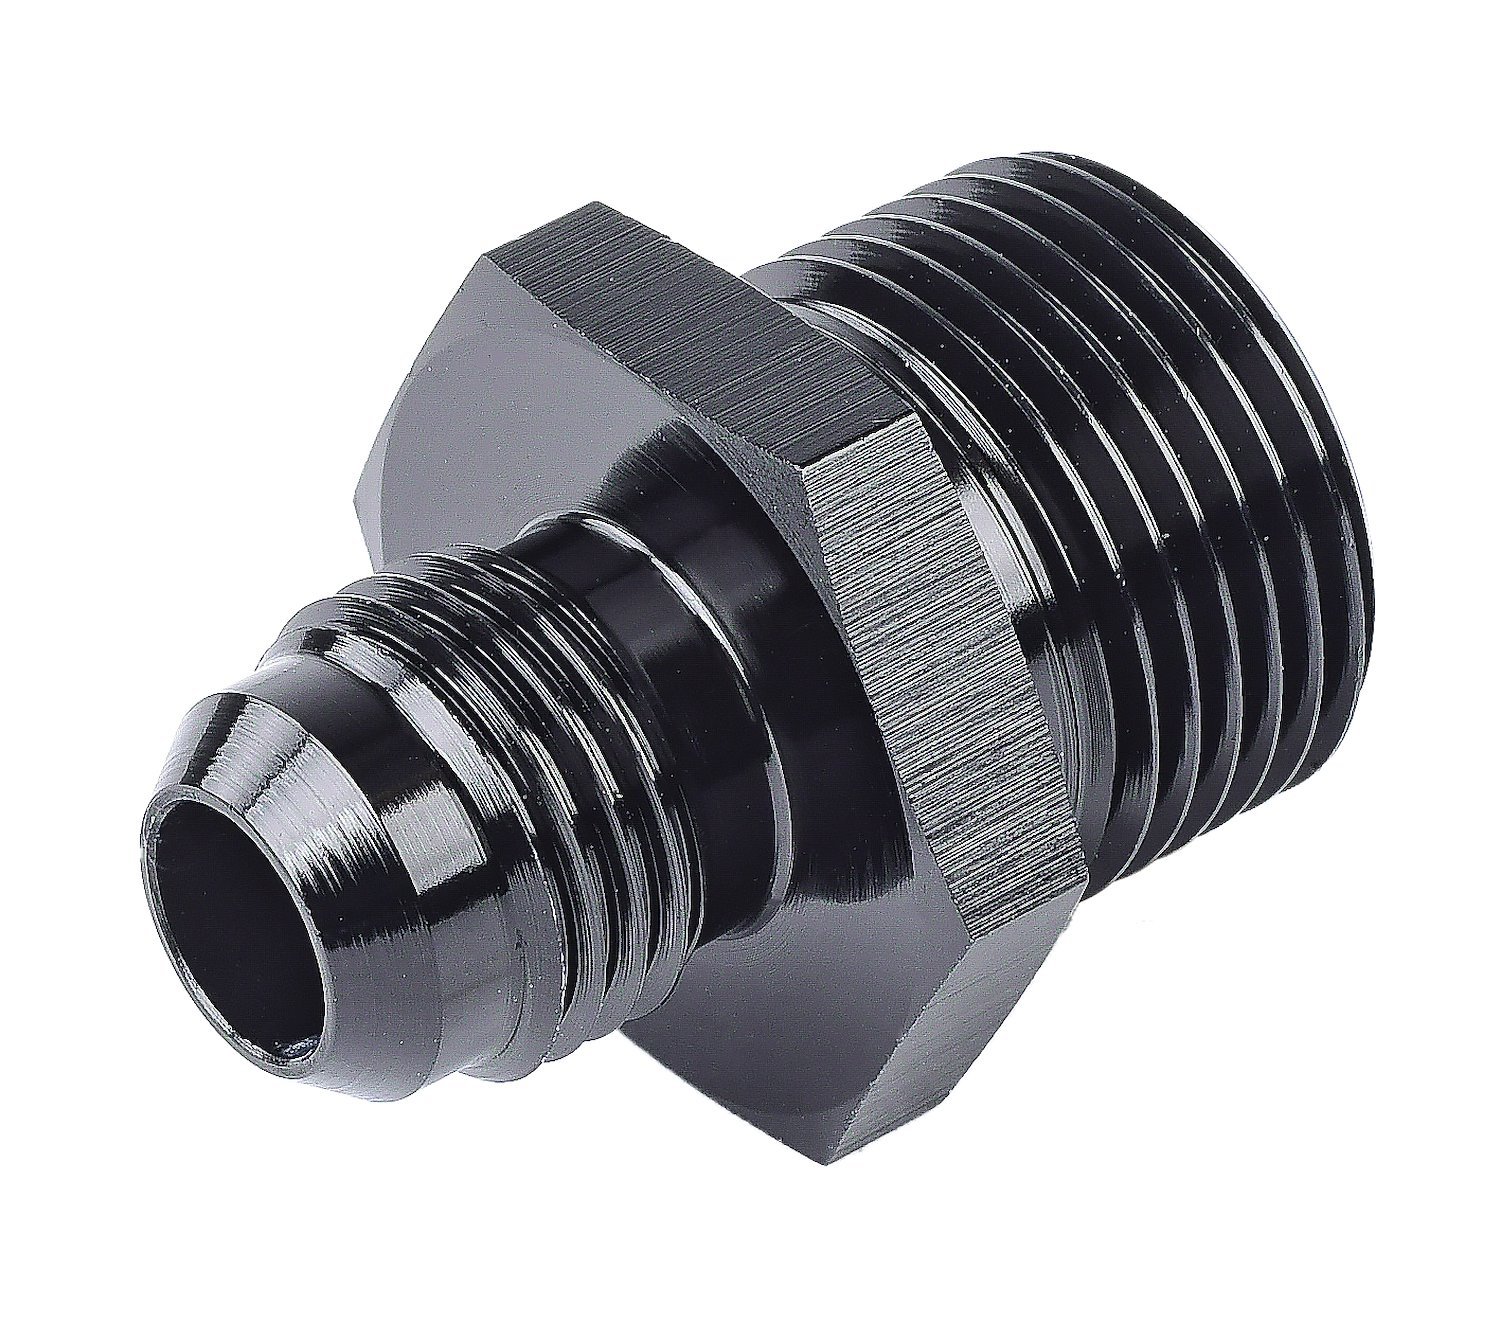 AN to Metric Adapter Fitting [-6 AN Male to 20mm x 1.5 Male, Black]